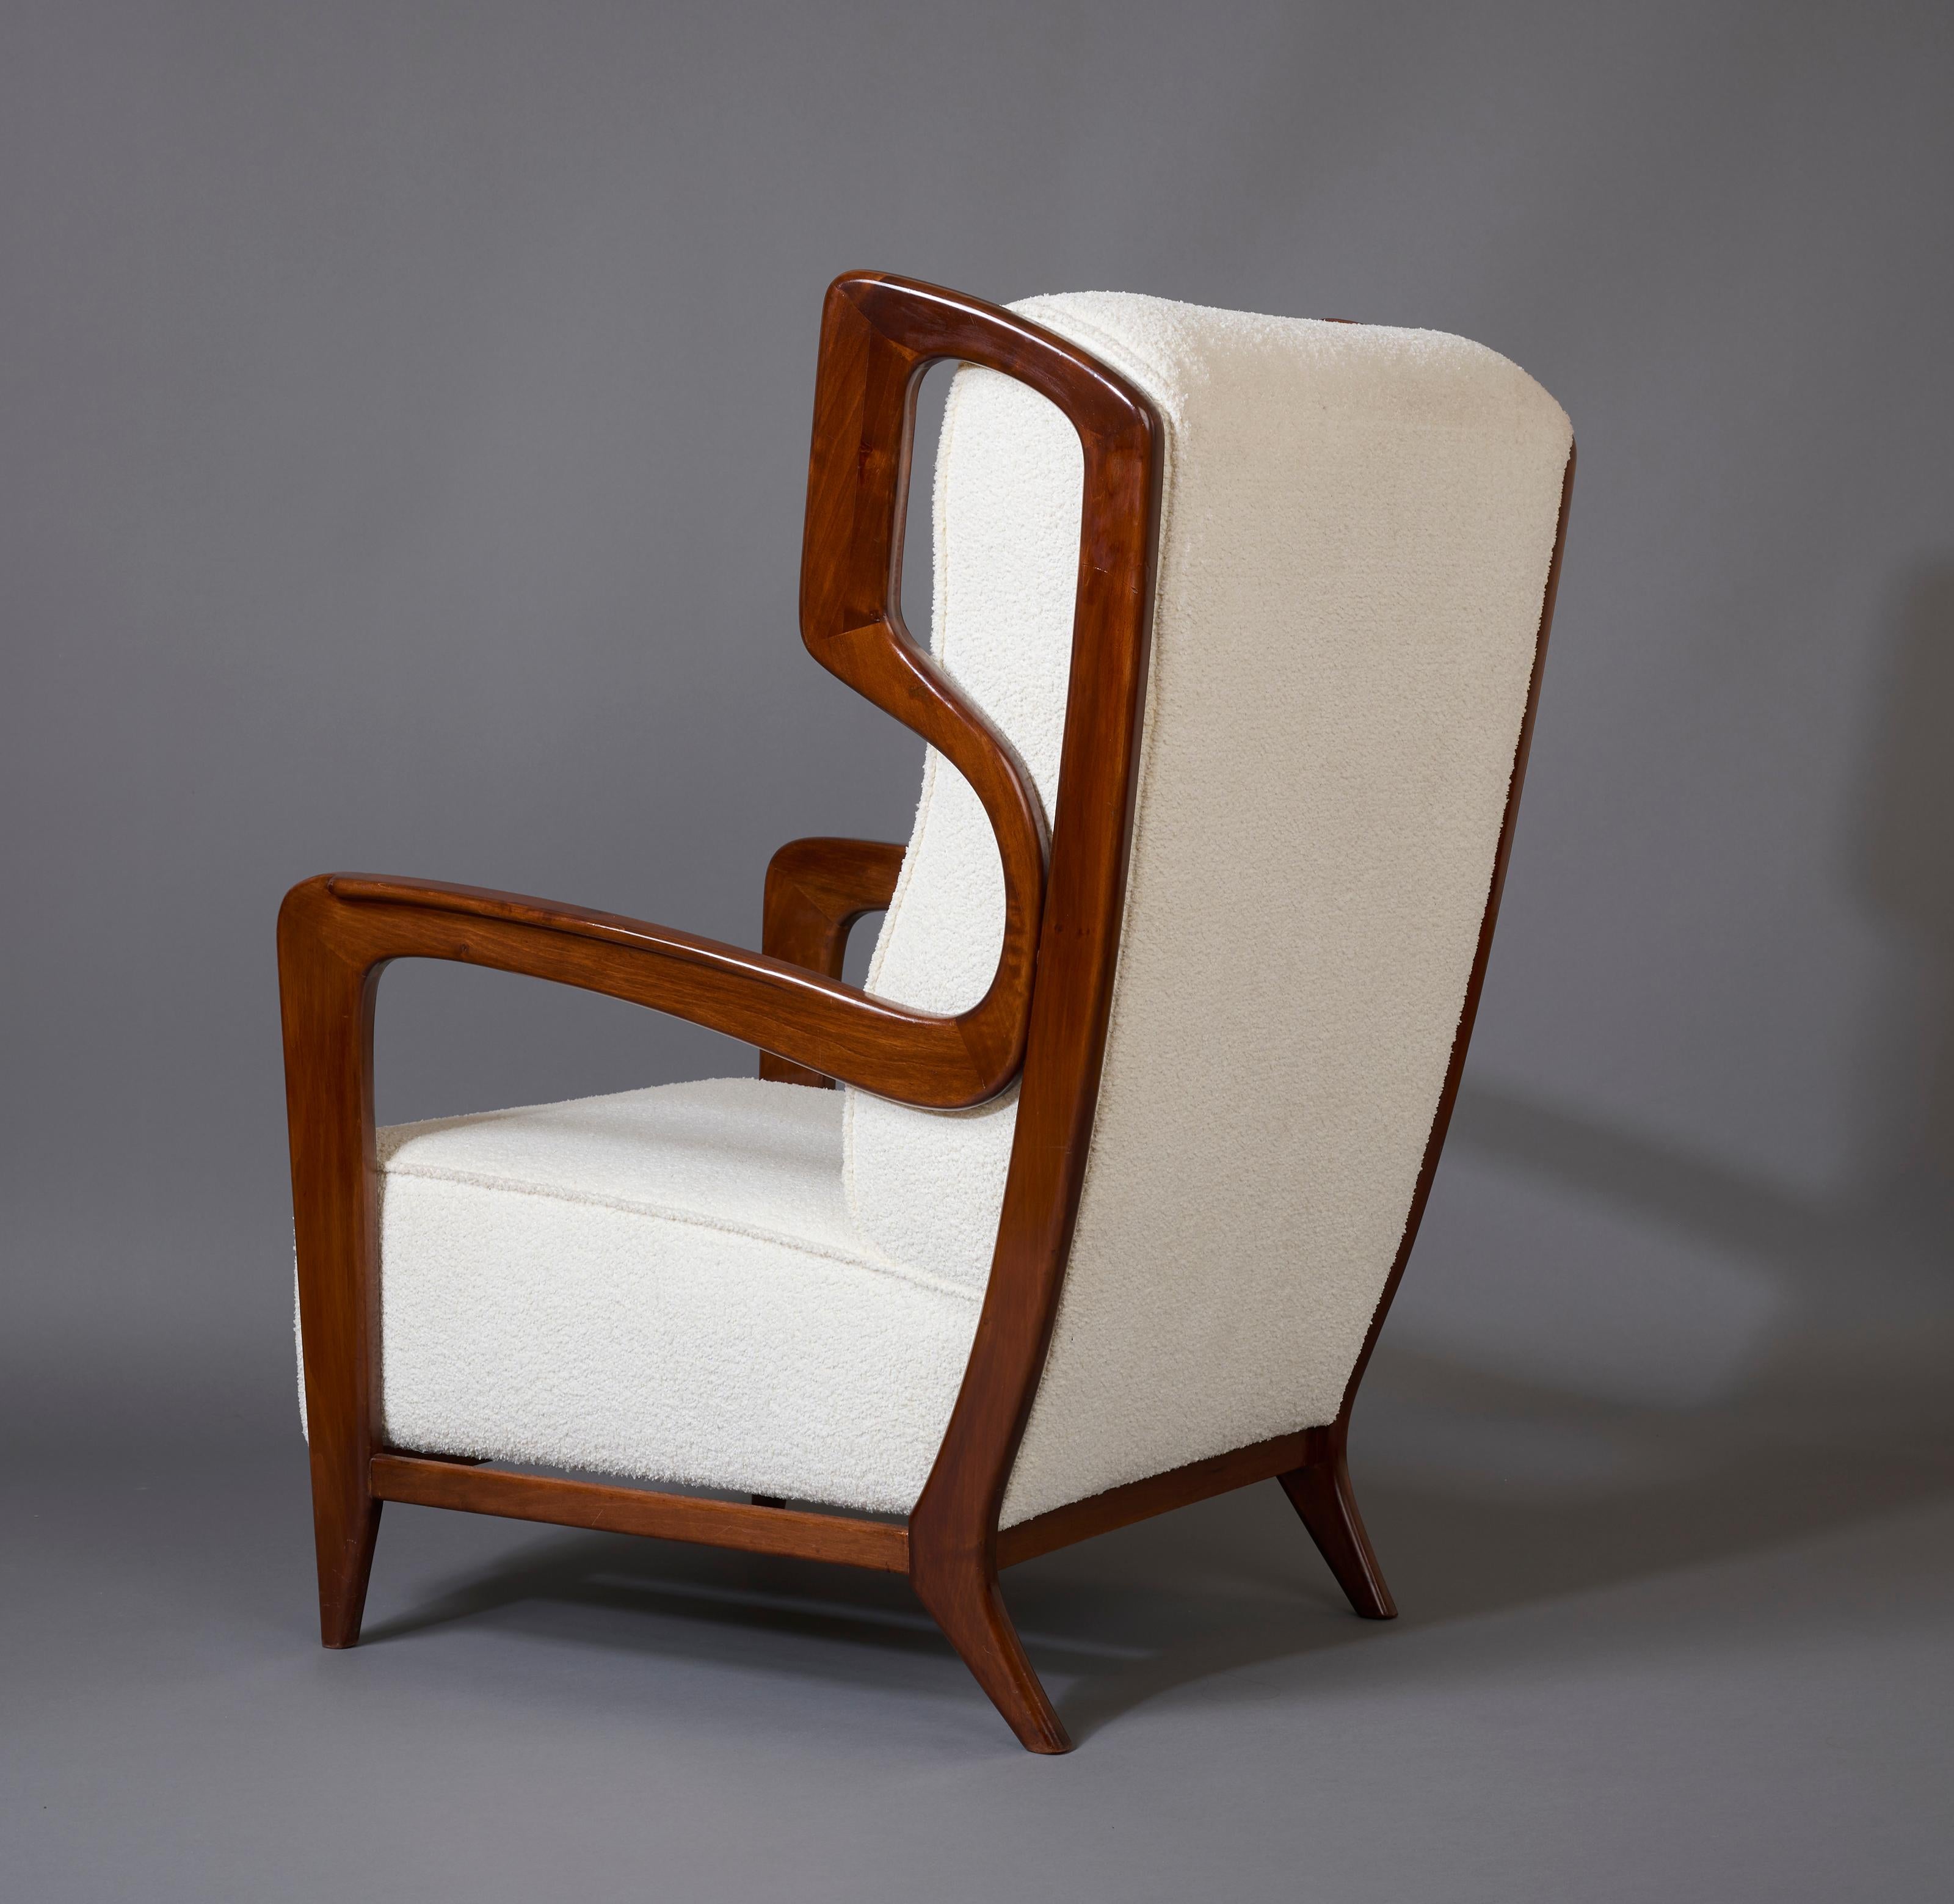 Gio Ponti, Exceptional Pair of Rare Wingback Armchairs in Walnut, Italy, 1940s For Sale 8